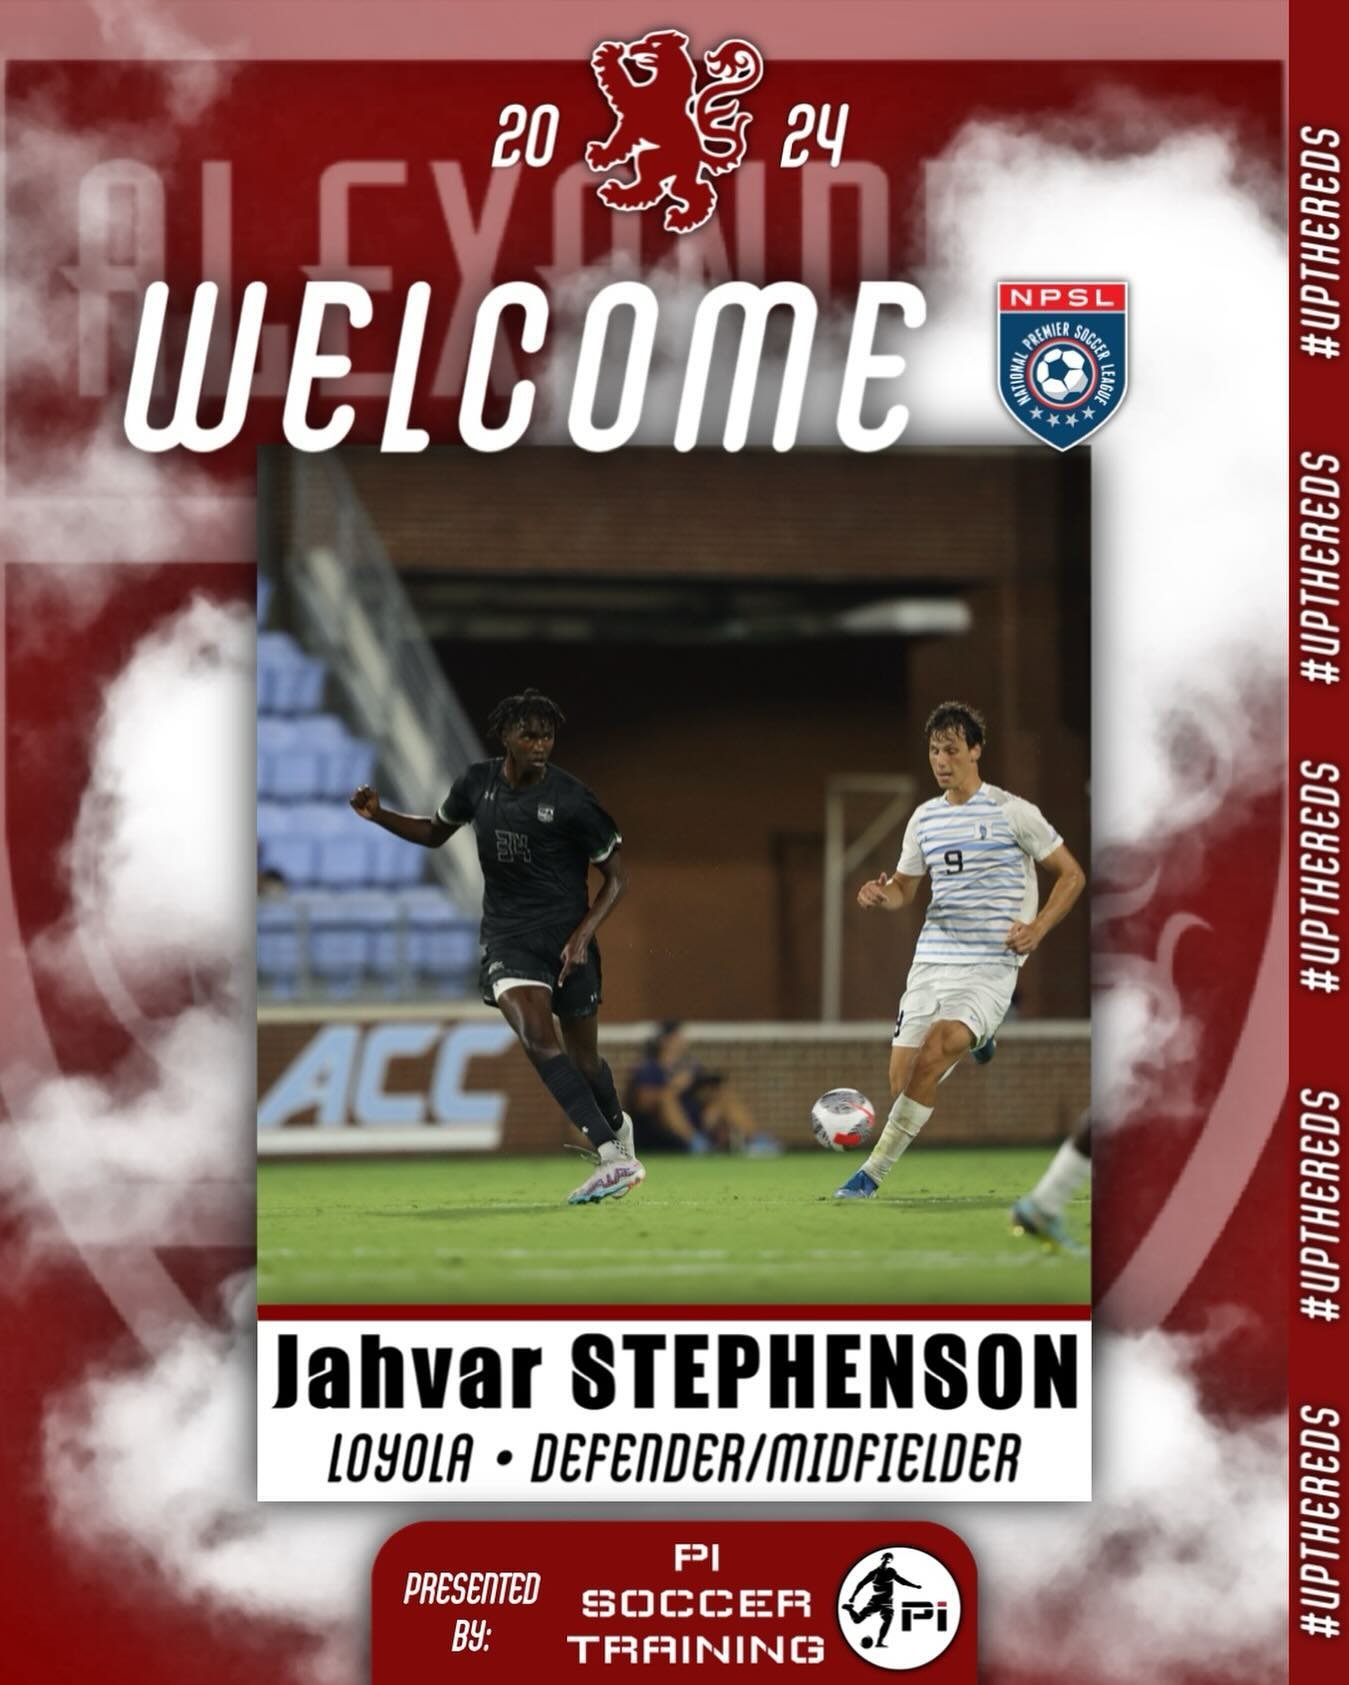 NEW 2024 NPSL PLAYER ANNOUNCEMENT

Welcome to the Reds, Jahvar Stephenson! Jahvar joins us after recently completing his sophomore season at Loyola University (Baltimore, MD). Standing at 6&rsquo;7 he has had a commanding presence in the back line an